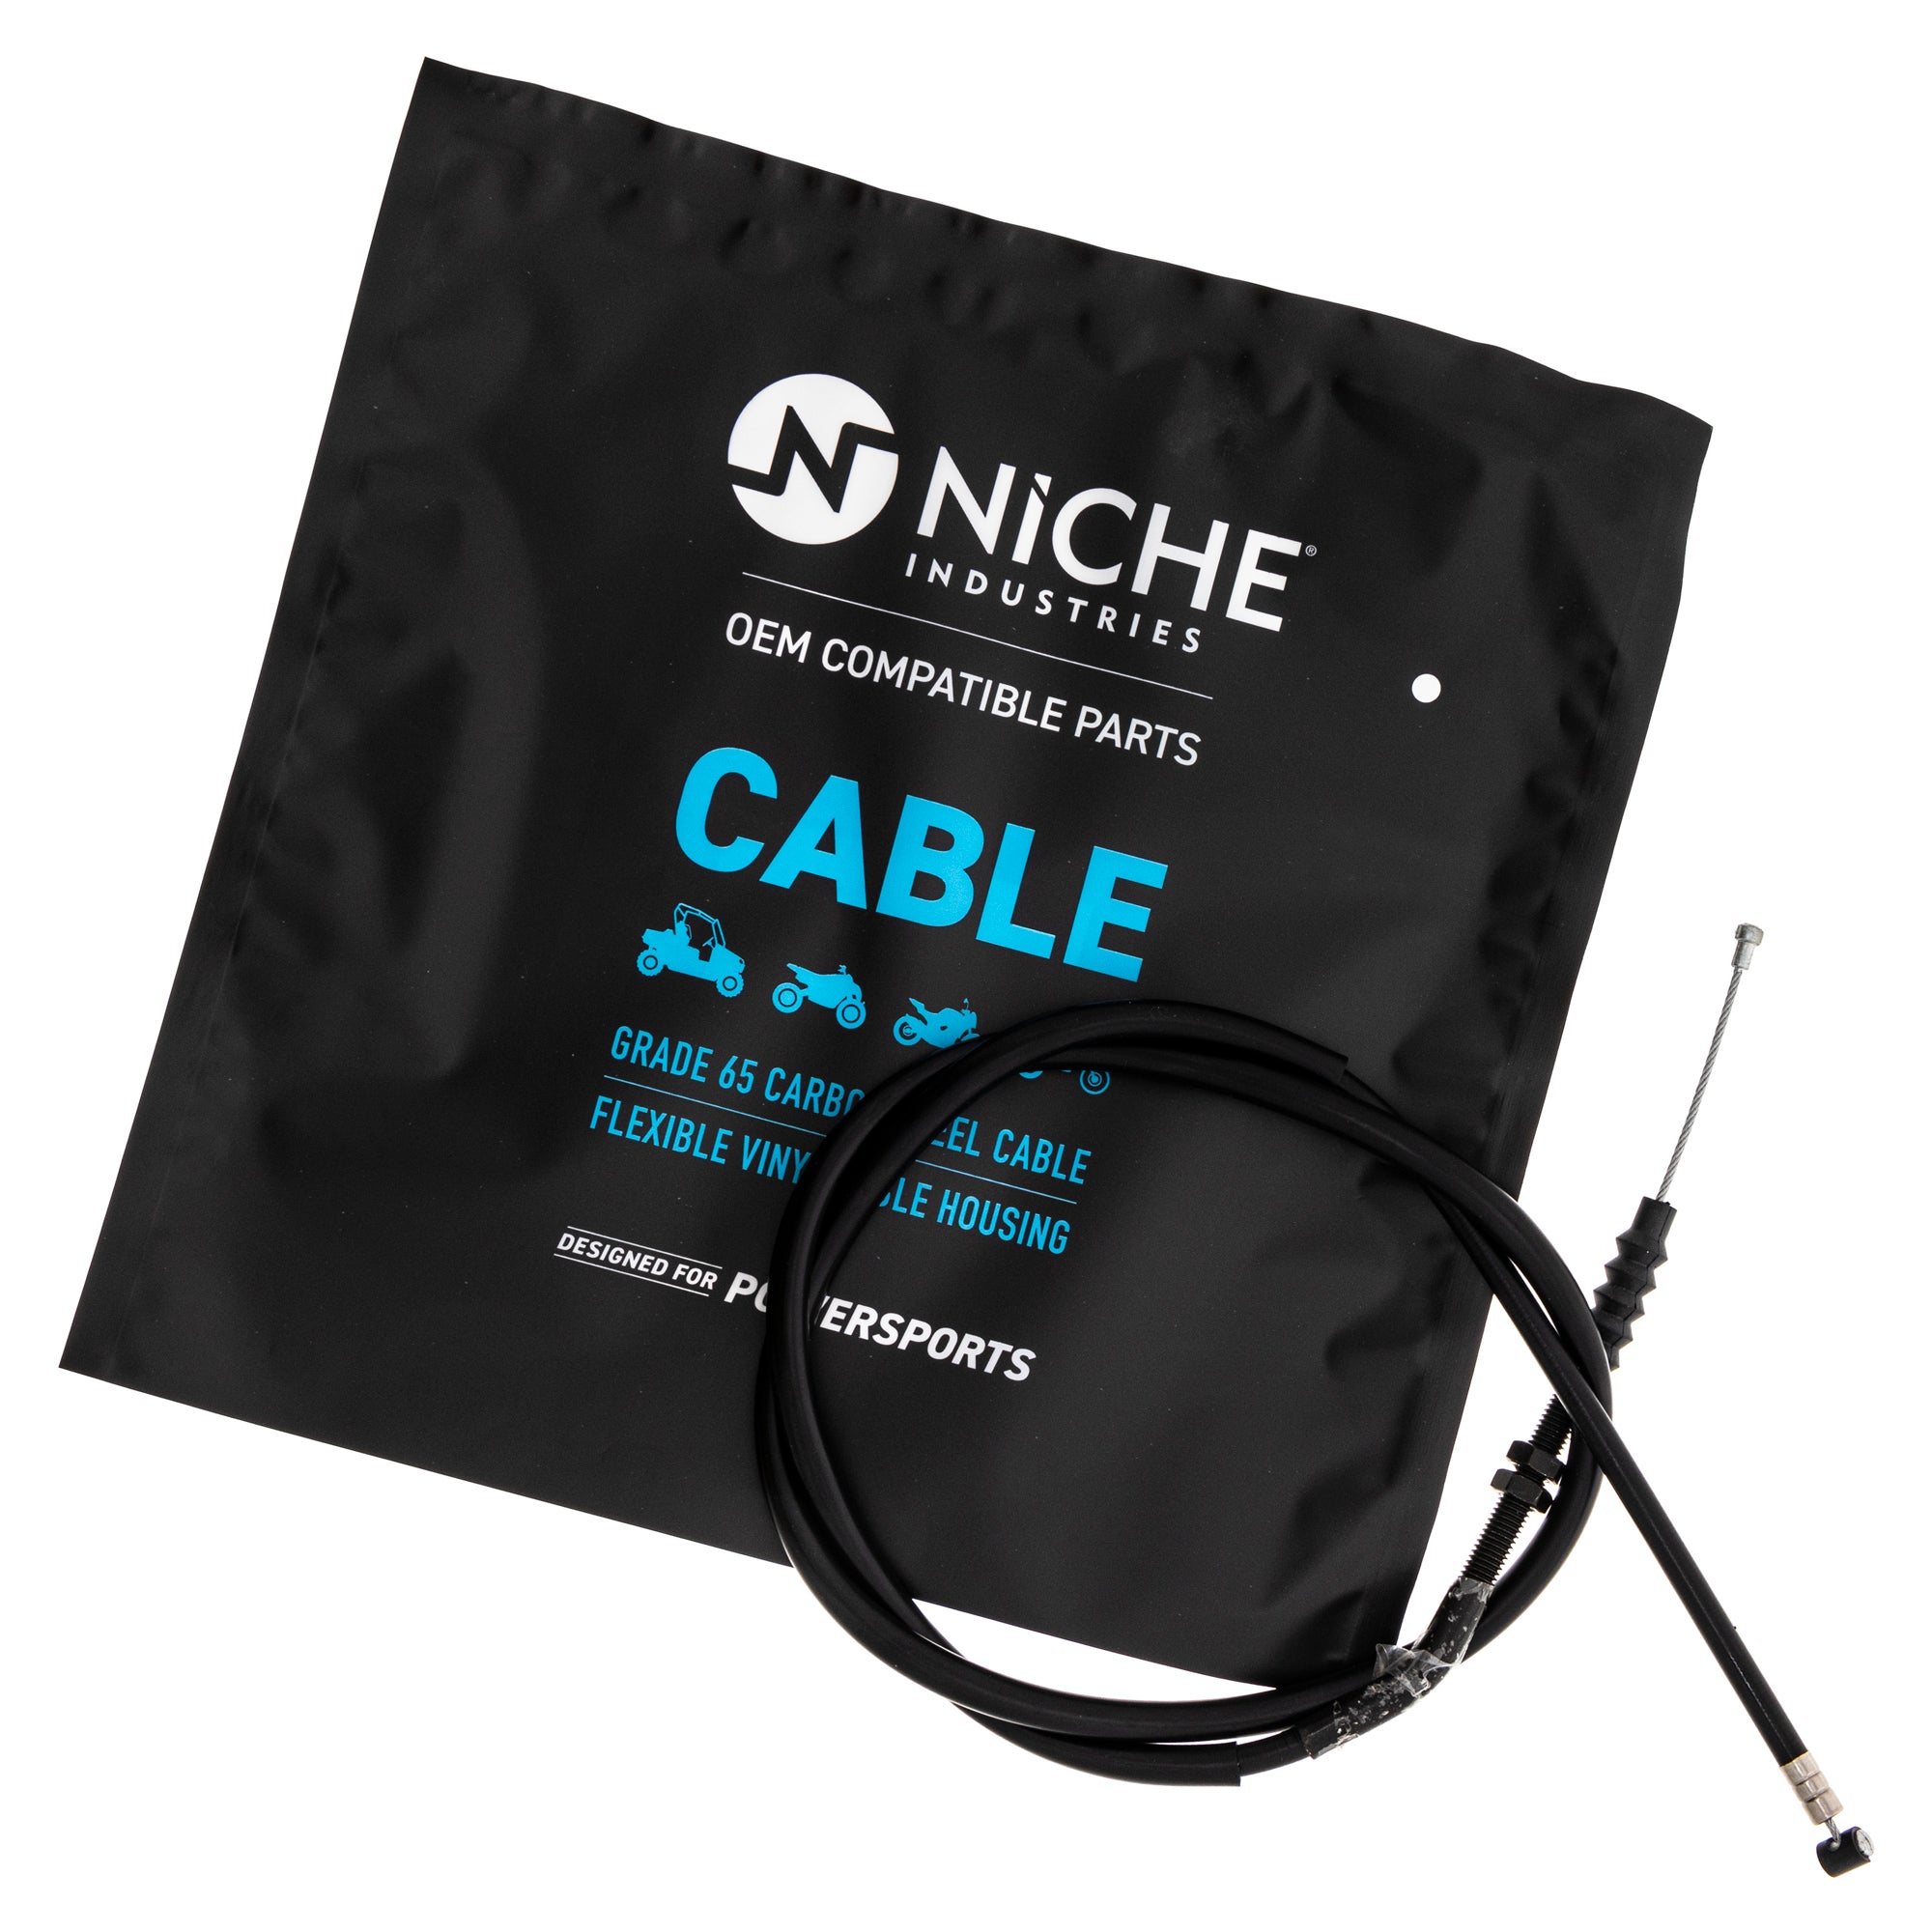 NICHE 519-CCB2673L Clutch Cable for zOTHER TRX400 SporTrax